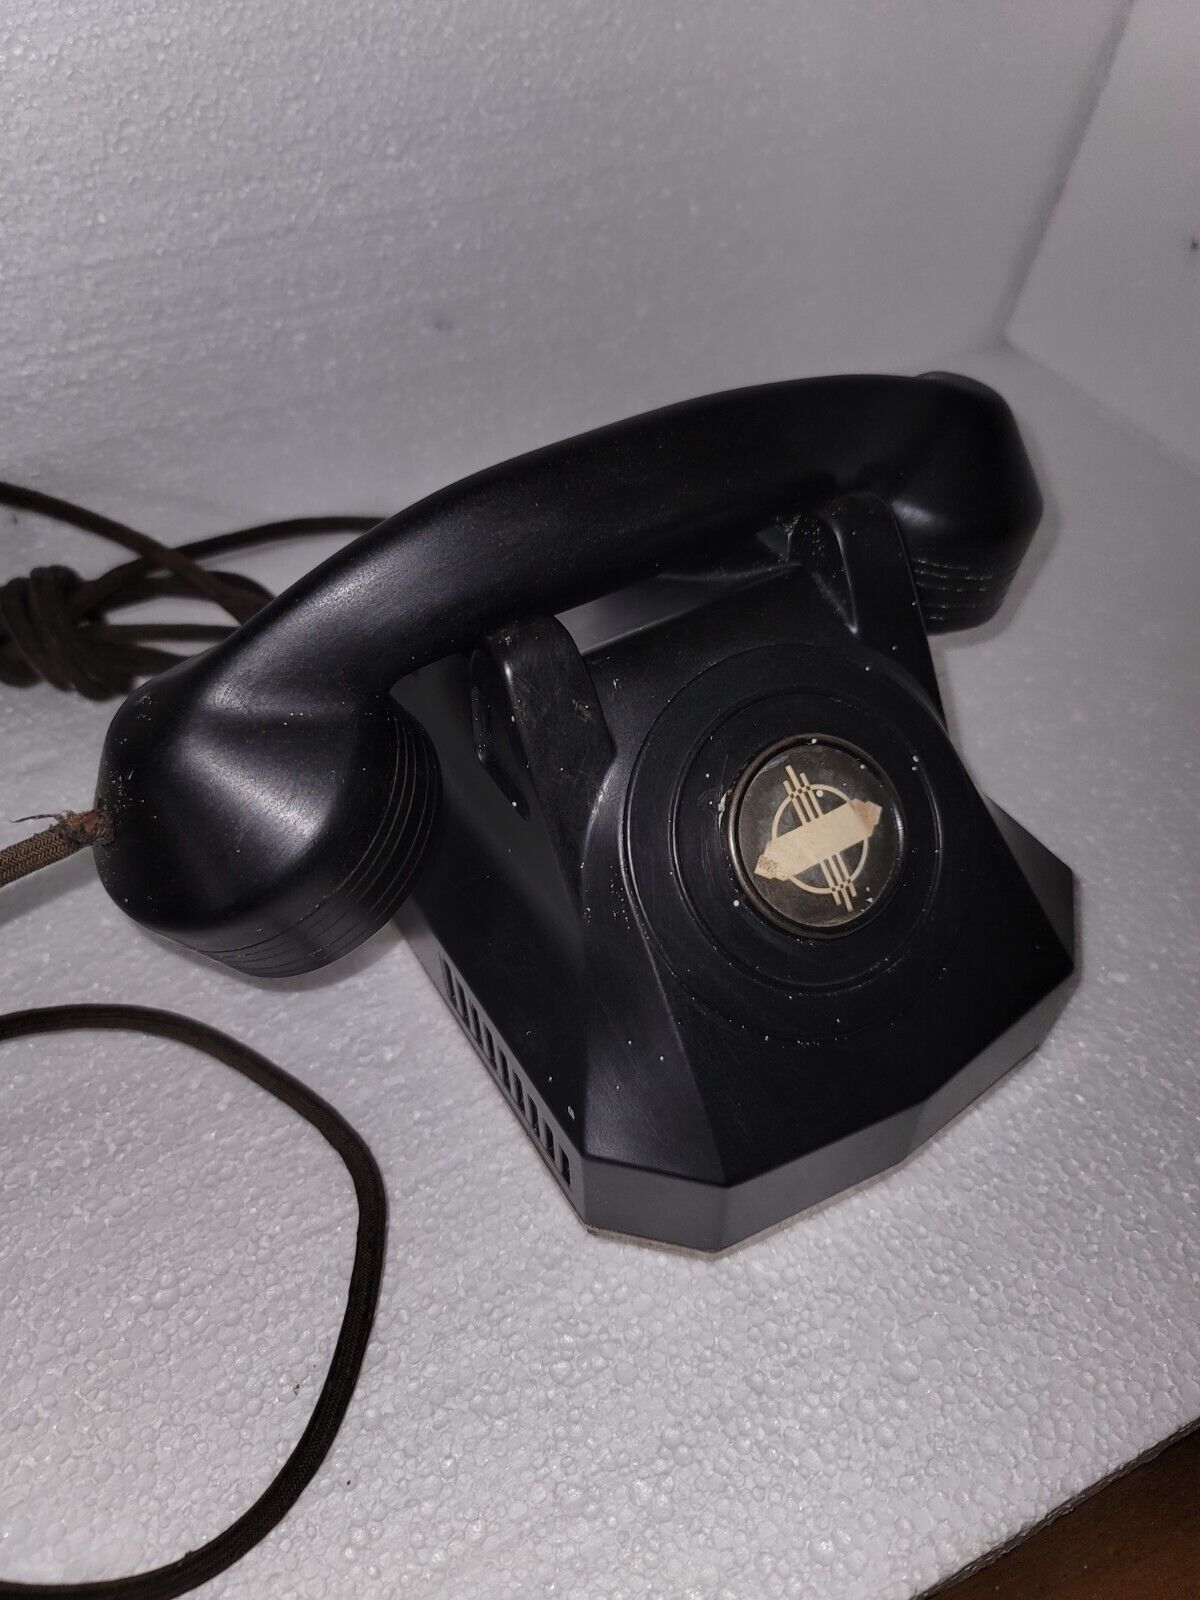 VINTAGE ART DECO AUTOMATIC ELECTRIC MONOPHONE ROTARY DIAL BLACK MODEL 